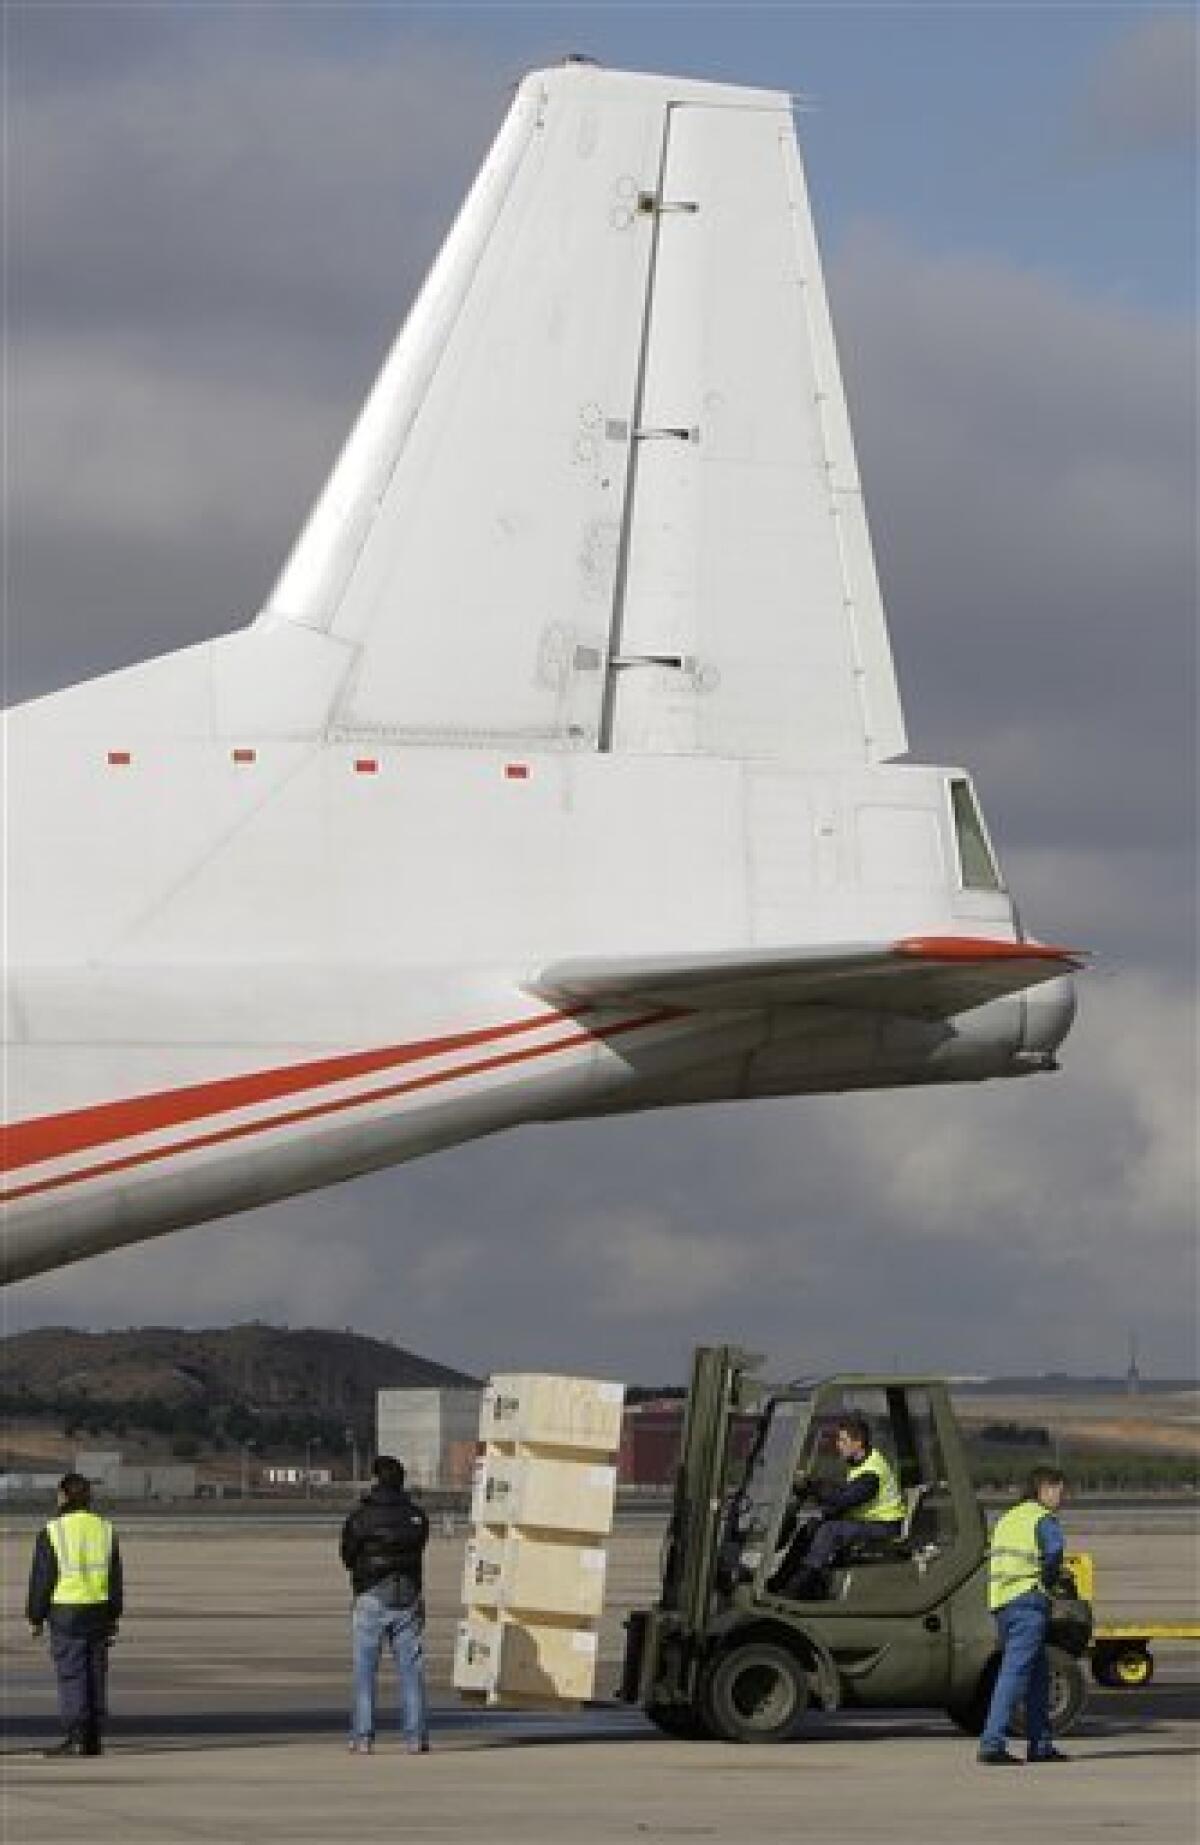 Humanitarian aid is loaded onto a plane at the Torrejon military airbase in Madrid, Spain, Monday Jan. 18, 2010. Aid supplies are being sent from Spain as part of a massive international effort to alleviate the effects of the earthquake in Haiti. (AP Photo/Paul White)